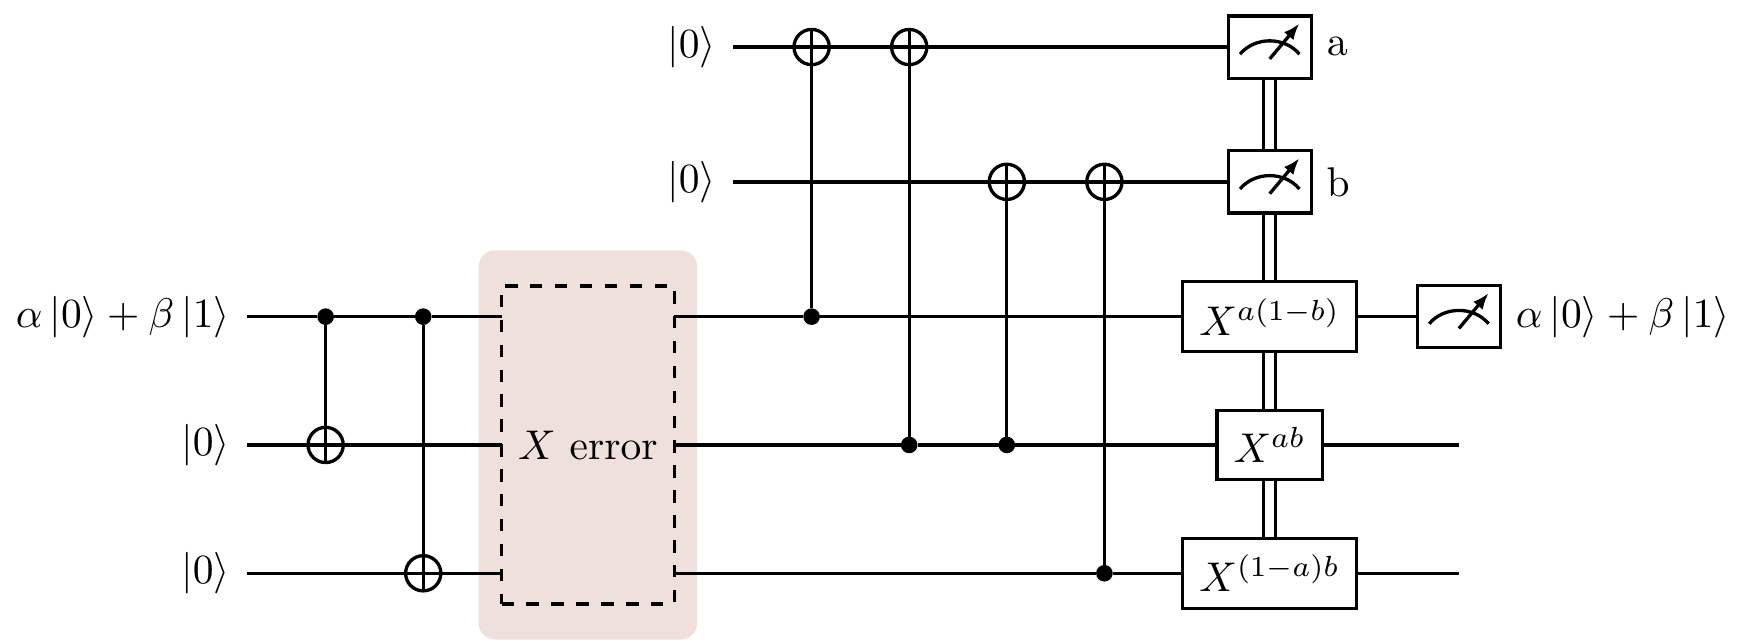 The quantised version of the classical [3,1,3] code. If at most one bit-flip error occurs in the shaded region (which denotes the part where we transmit over a noisy channel), then this circuit perfectly corrects it, resulting in the successful transmission of the state \alpha|0\rangle+\beta|1\rangle.